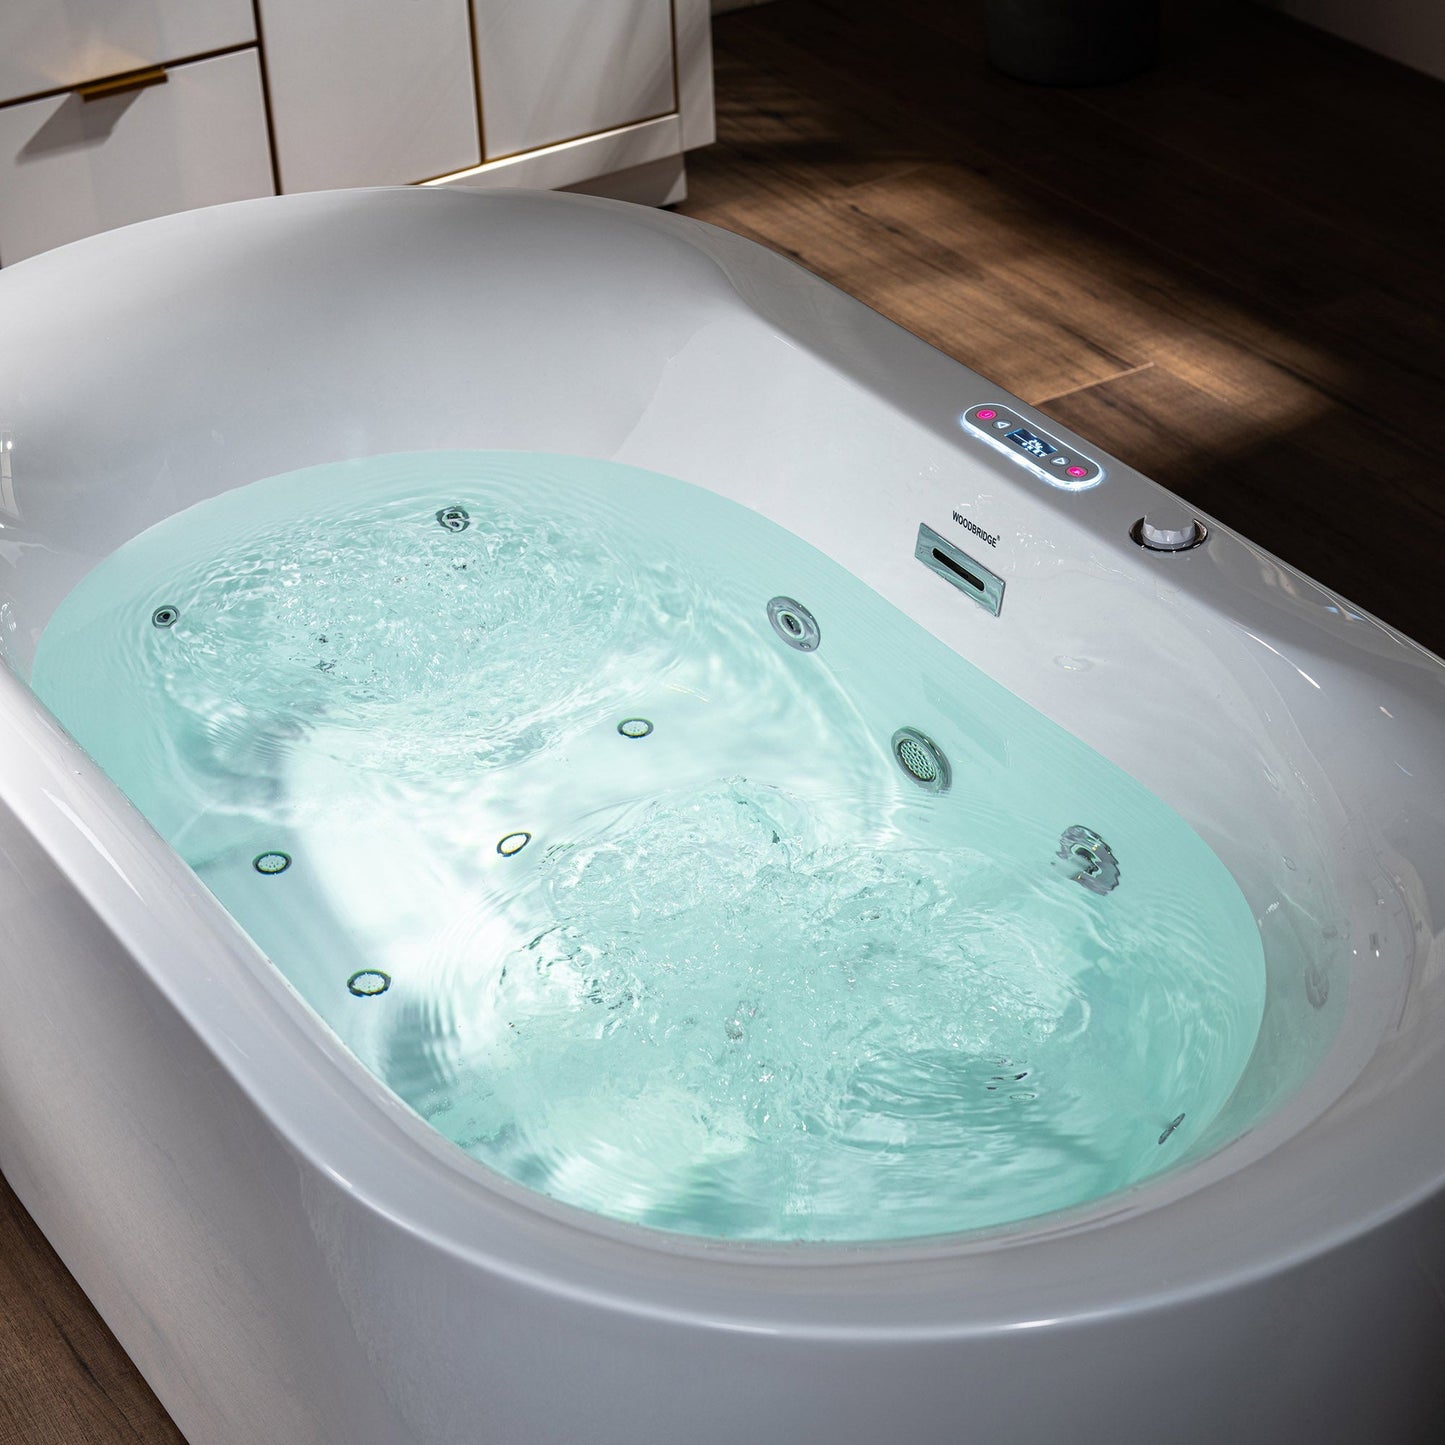 WoodBridge BJ100 60" White Acrylic Freestanding Whirlpool Water Jetted and Air Bubble Heated Soaking Bathtub With LED Control Panel